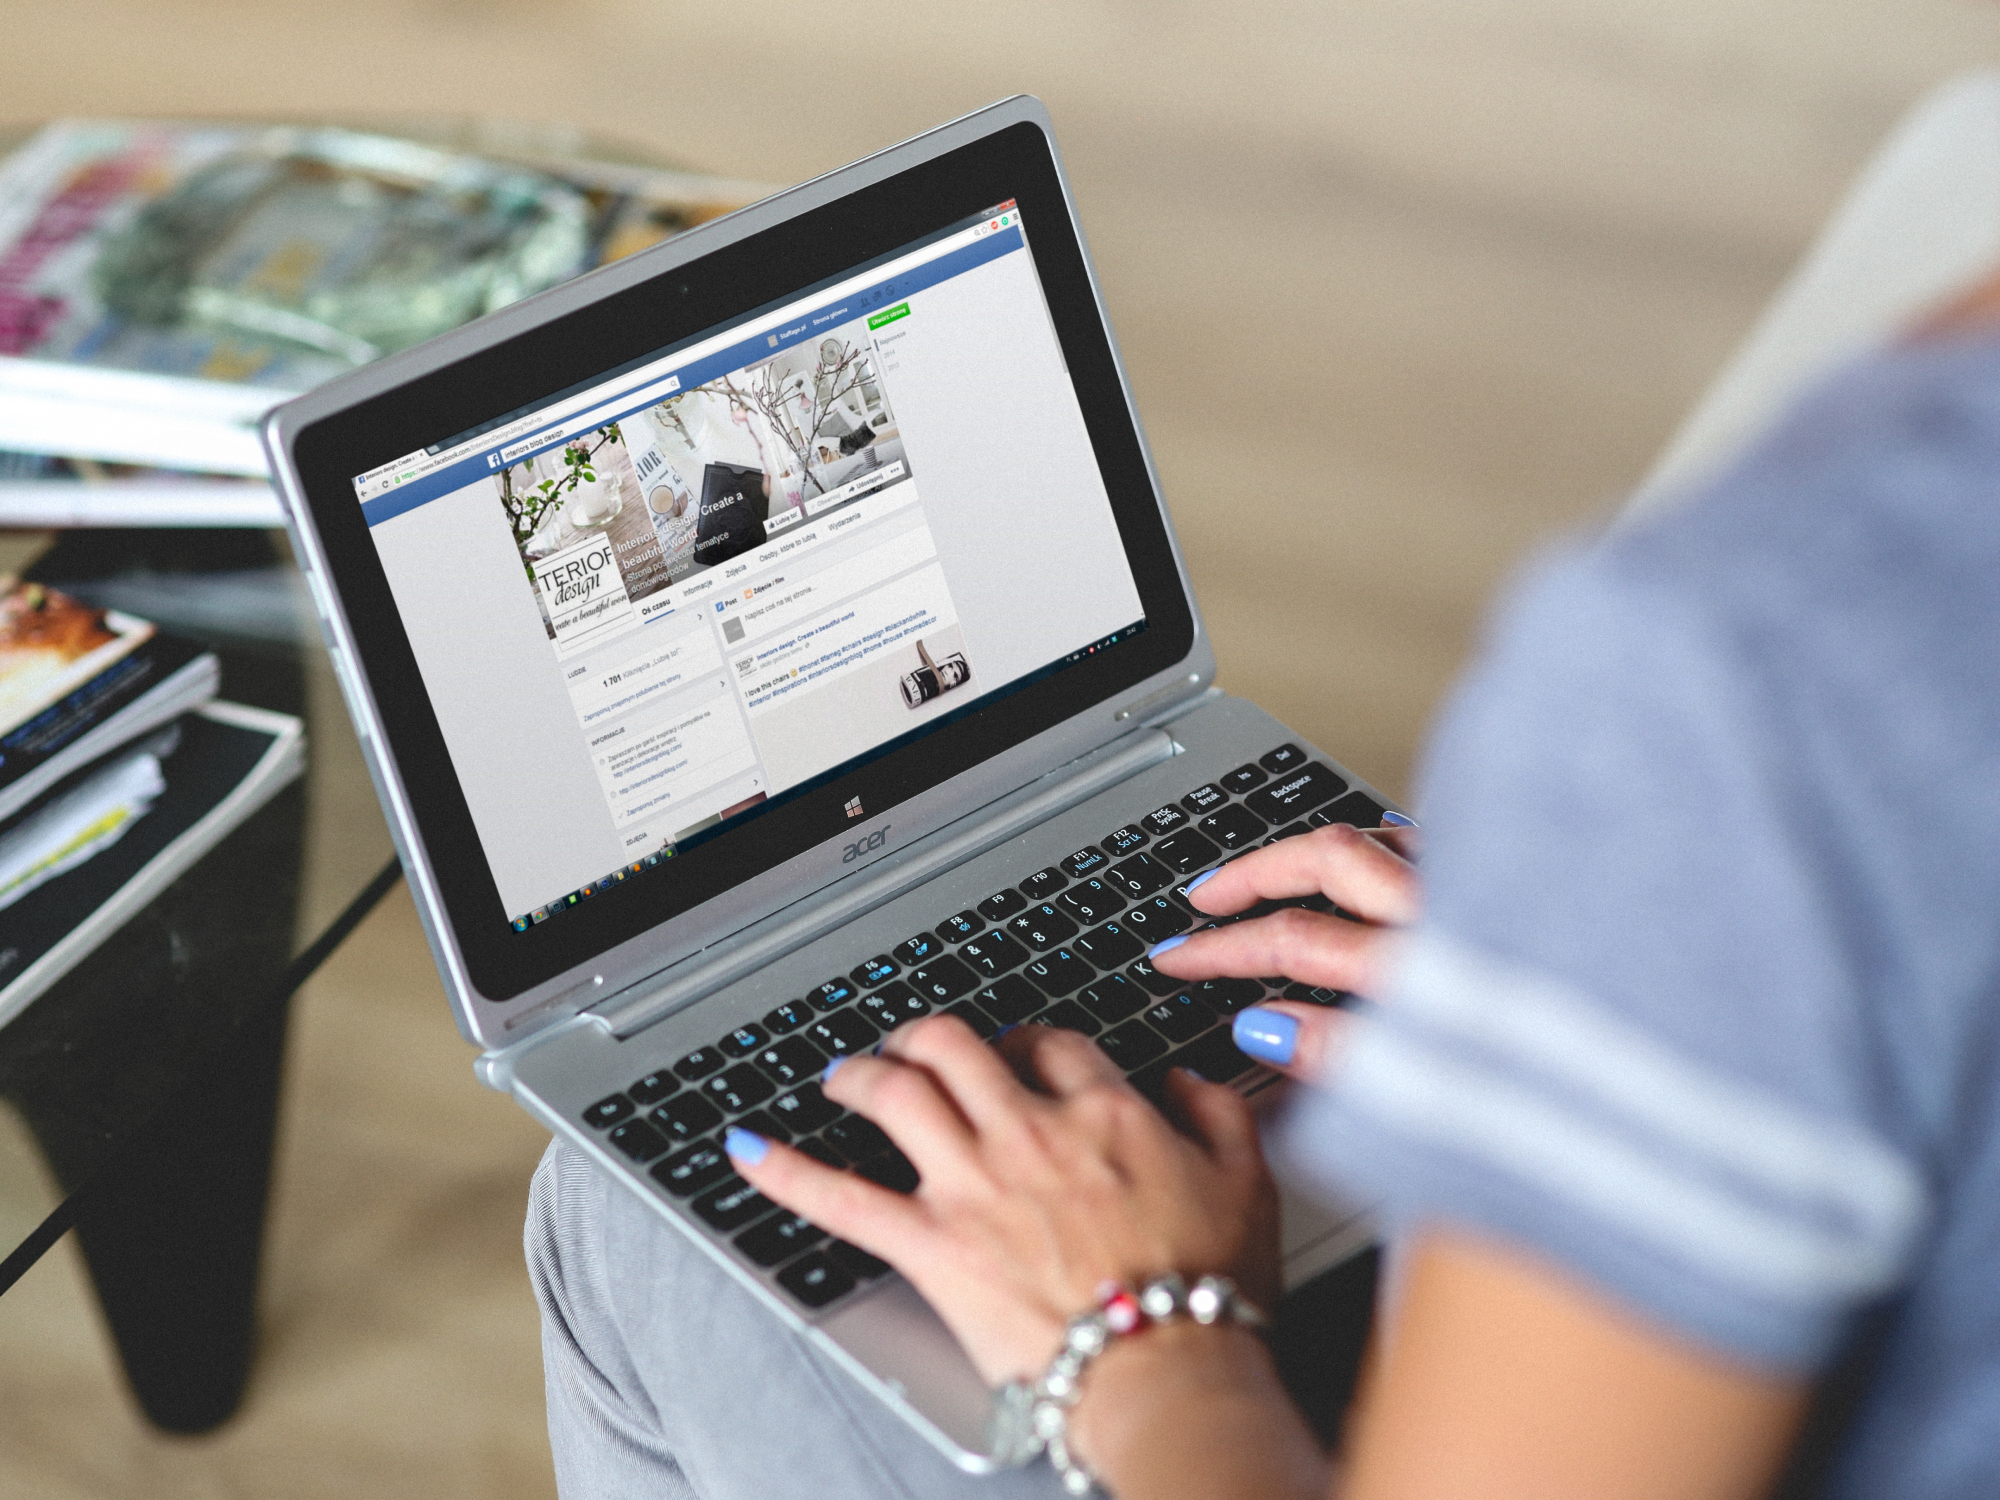 How to keep your Facebook account safe and secure